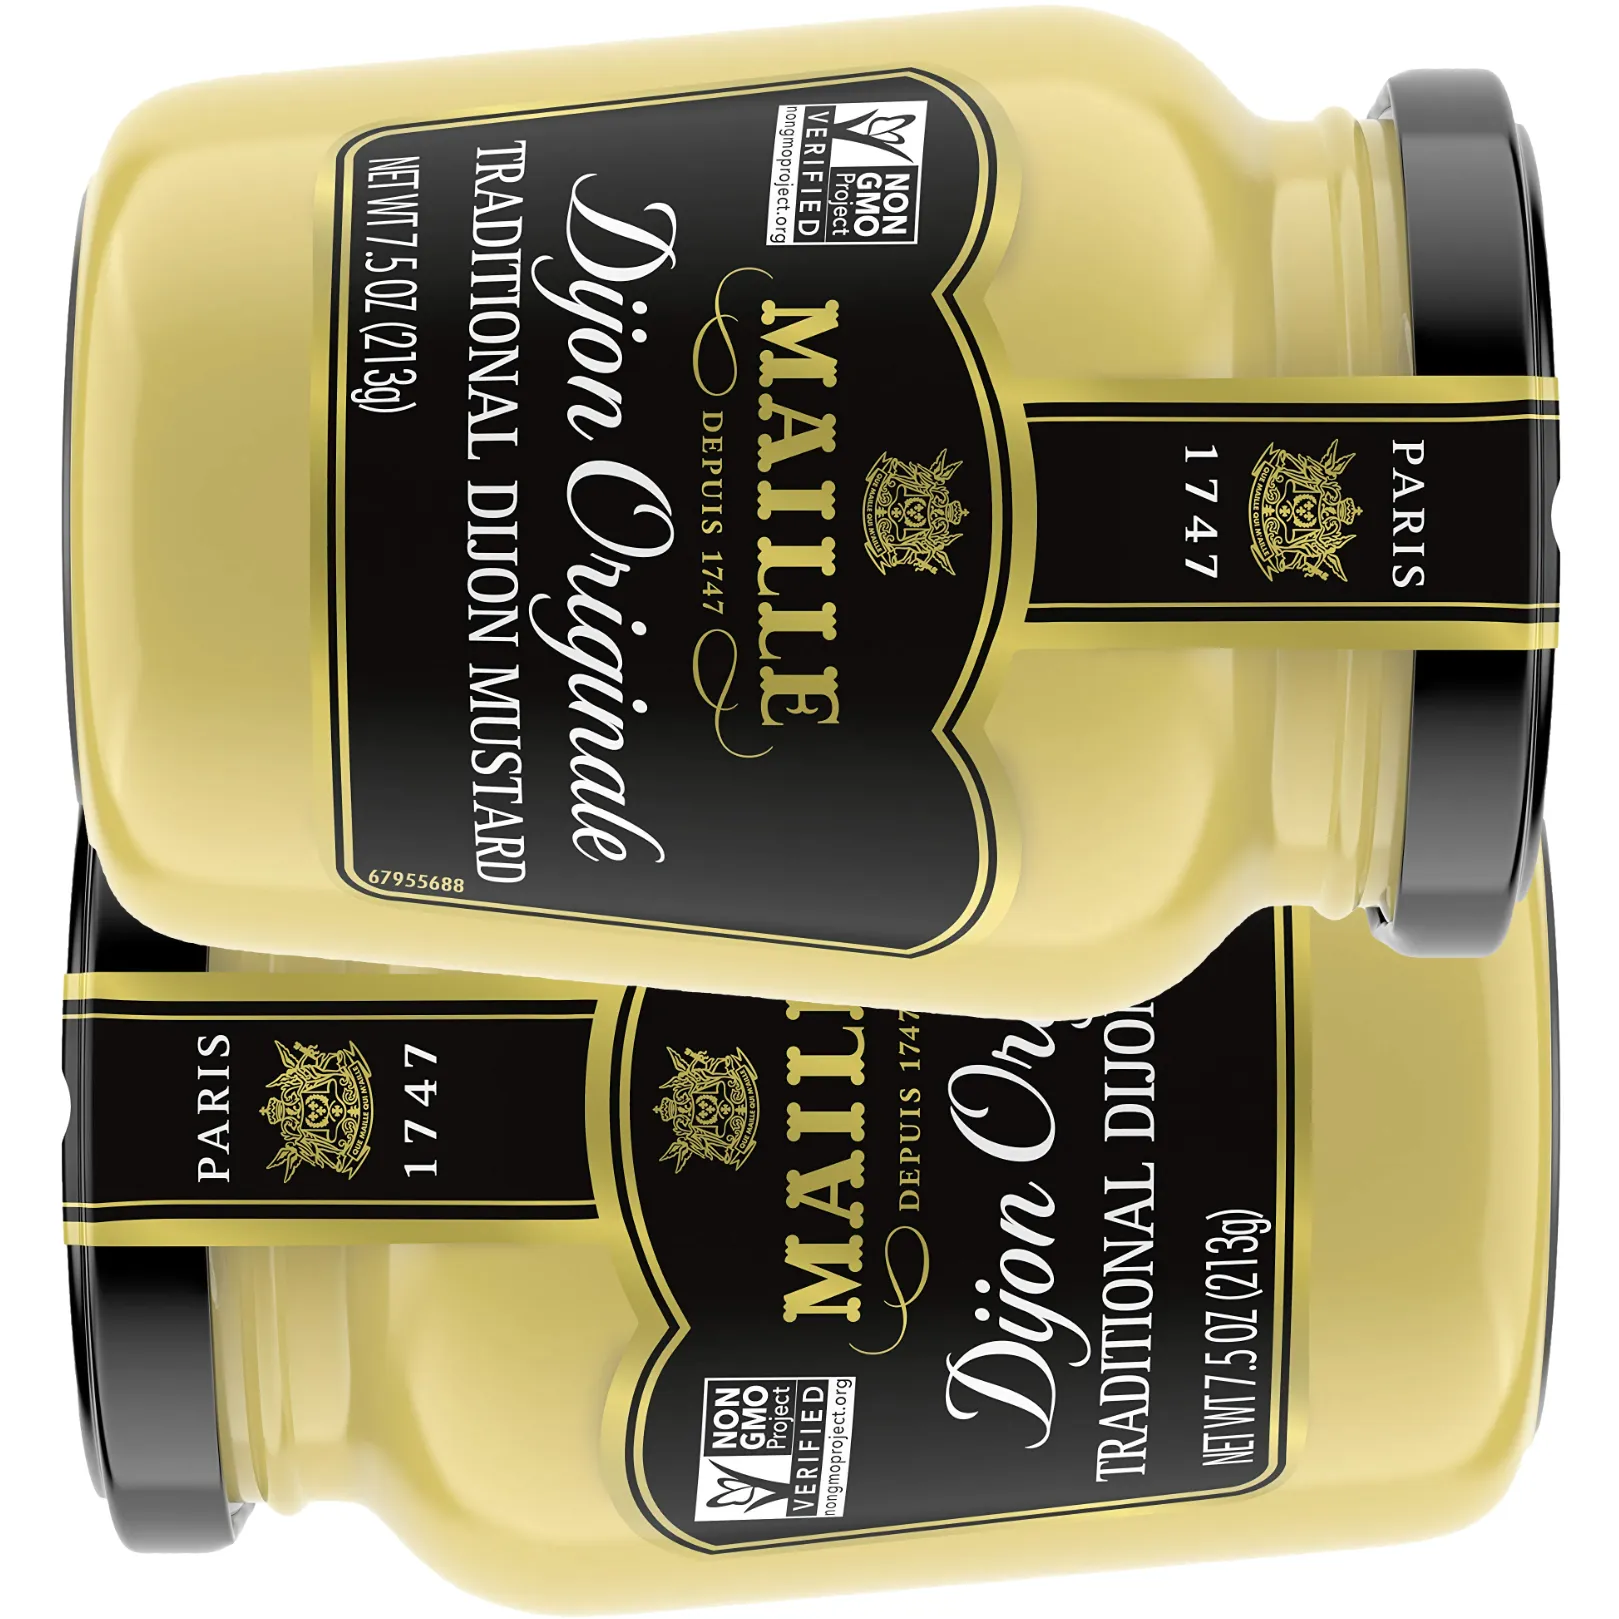 Free Maille's Gourmet Mustard